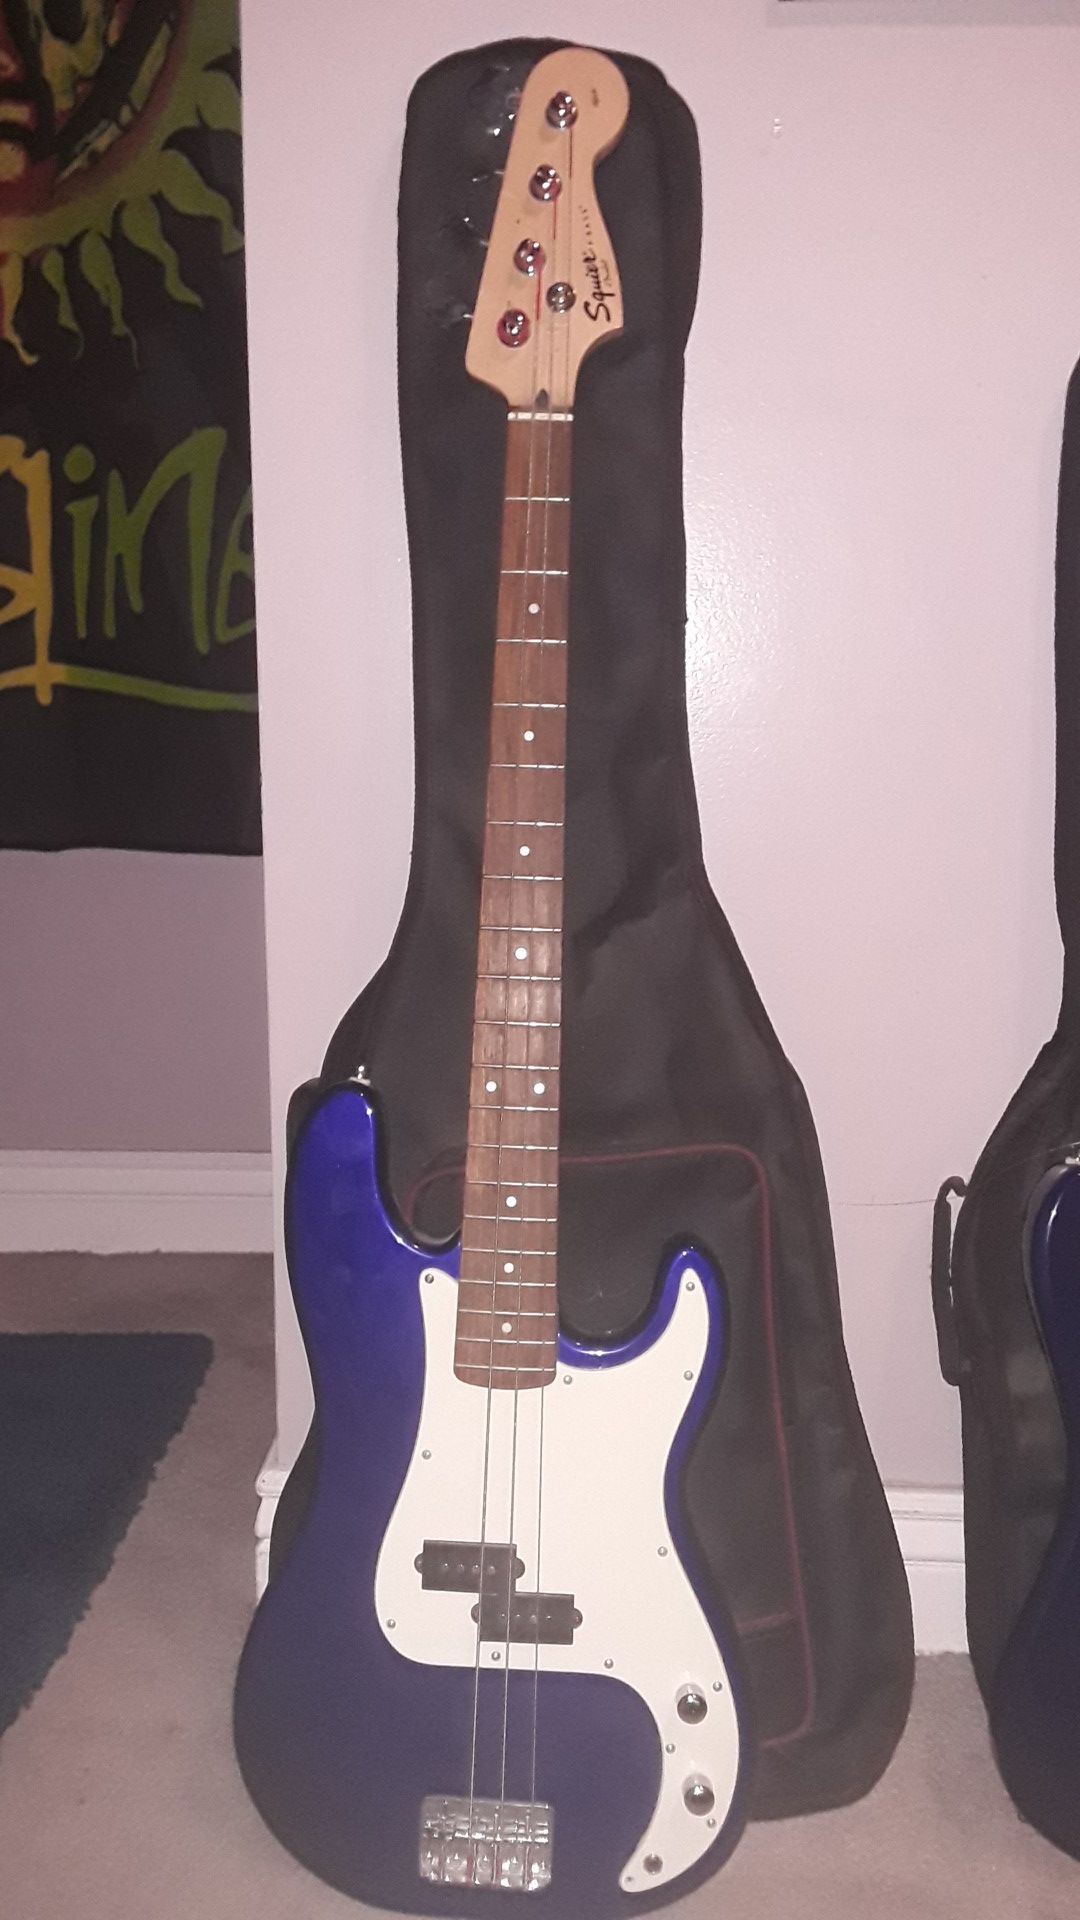 Squire p-bass guitar by fender